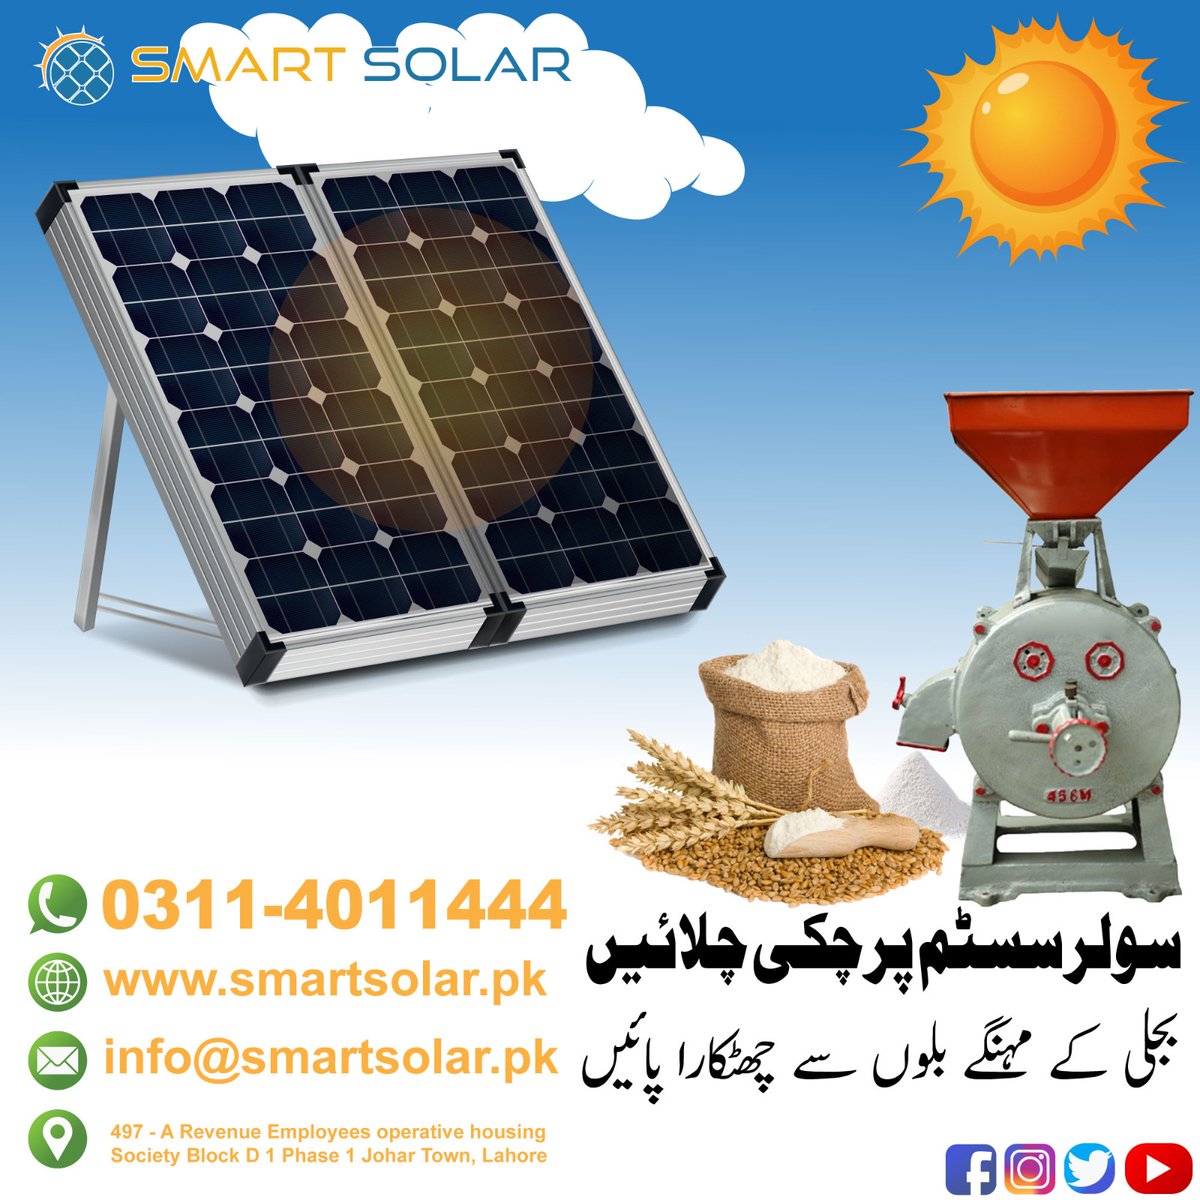 Bring the power of the sun to your service! 
#ChooseSolar #SMARTSOLAR
For more details please contact 0311-4011444 
#SmartSolar #Solar #SolarPanels #SolarBatteries #SolarInverters #SolarInstallation #SolarHeater